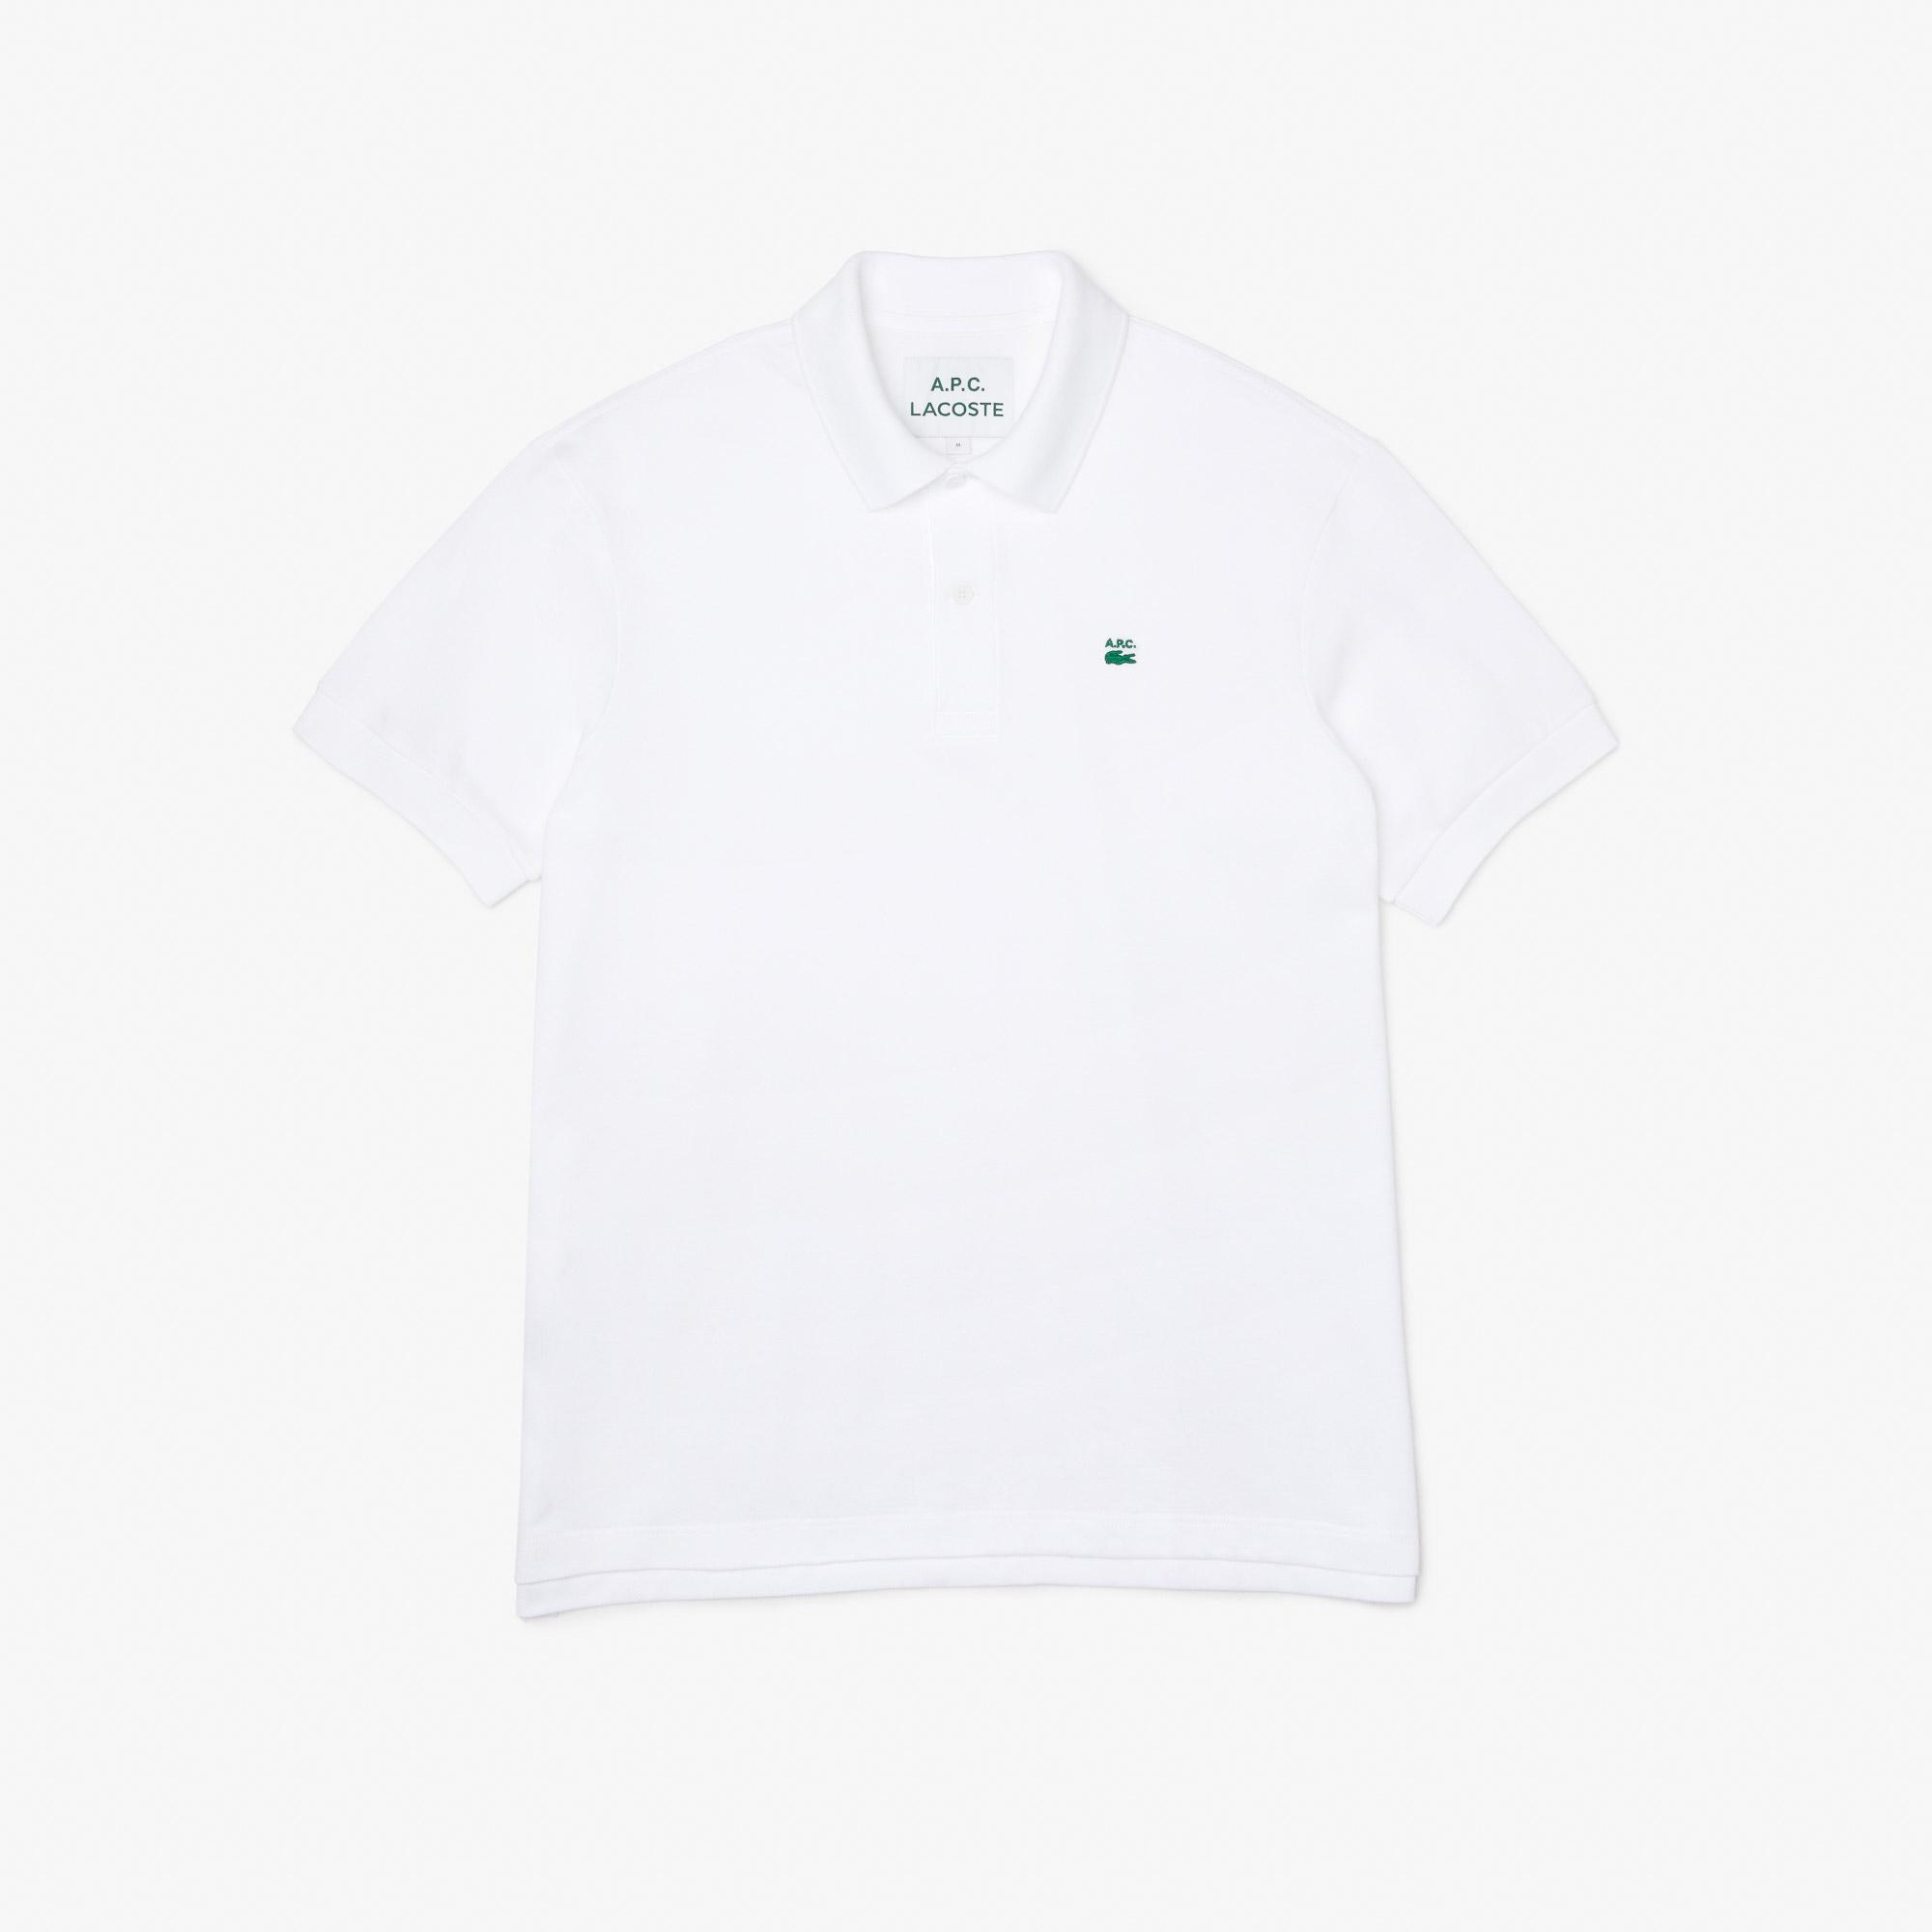 Lacoste X A.P.C Erkek Relaxed Fit Beyaz Polo. 2